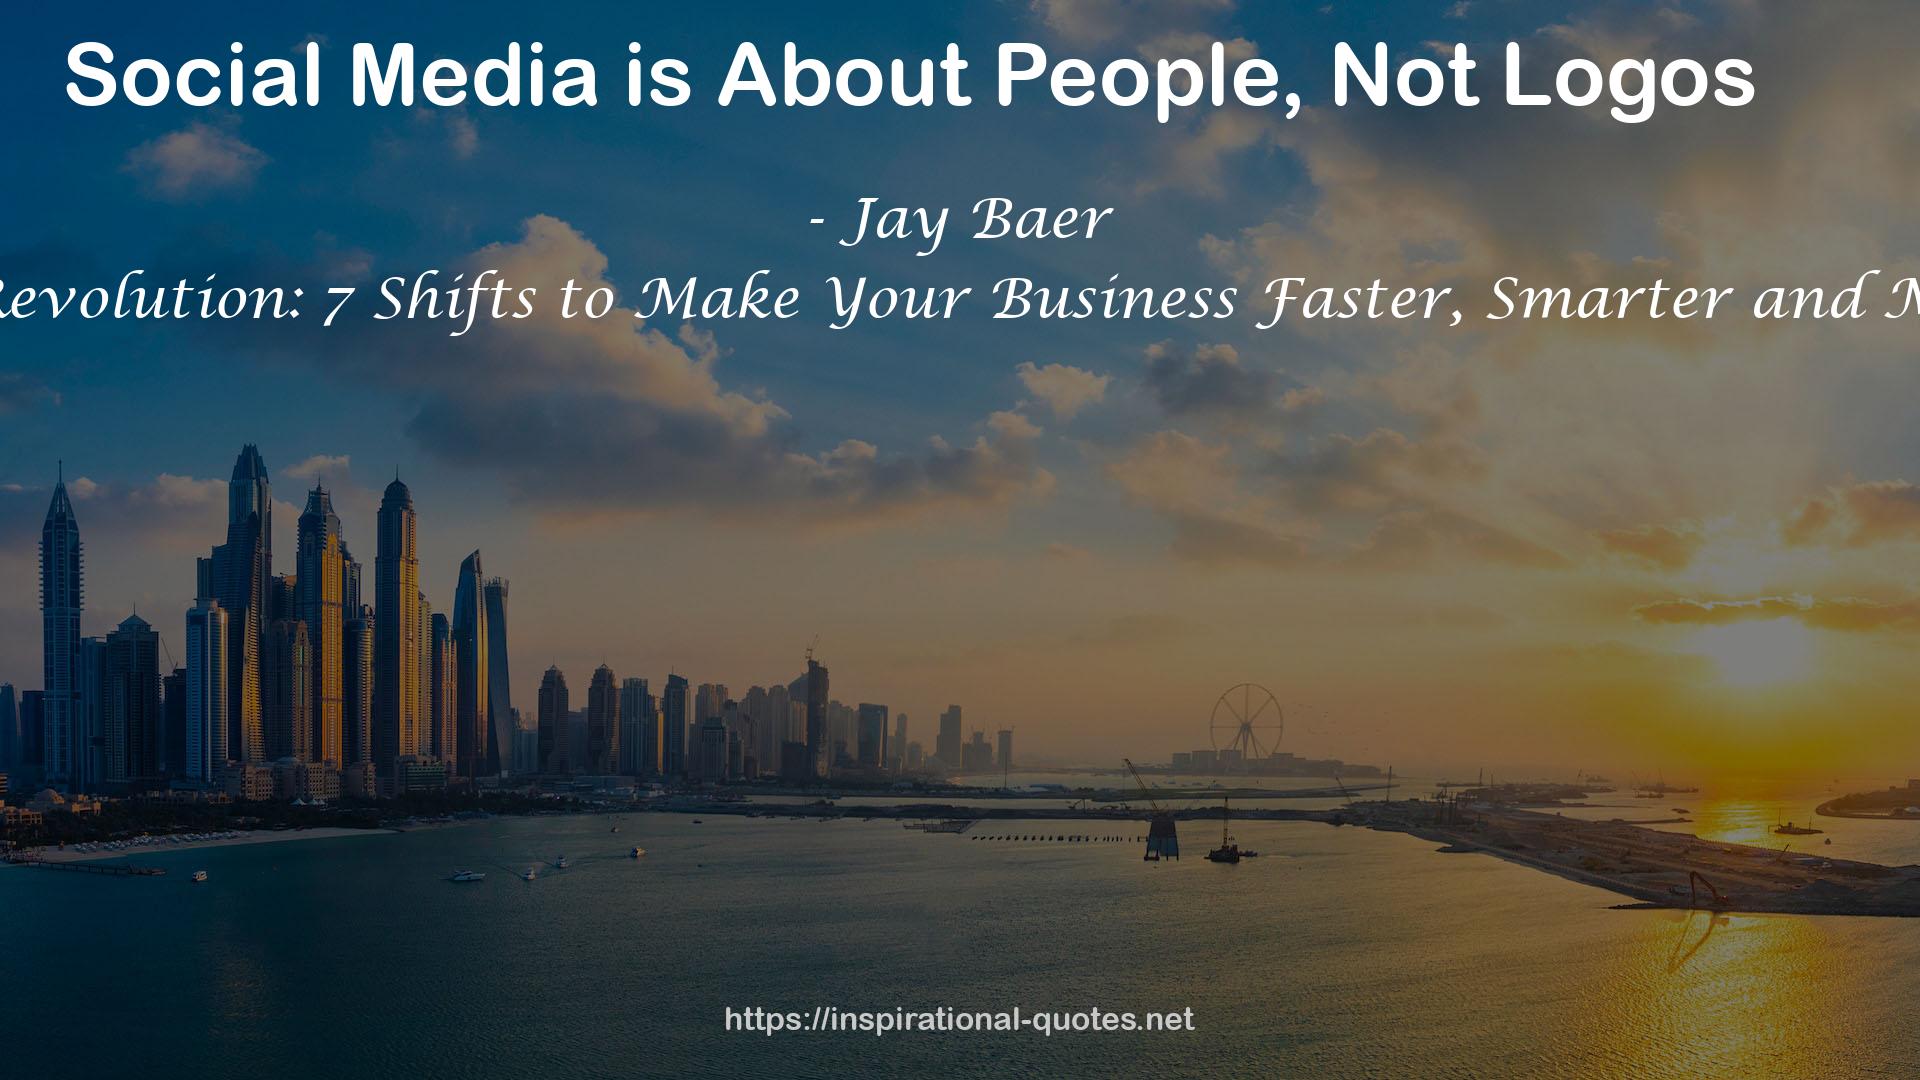 The Now Revolution: 7 Shifts to Make Your Business Faster, Smarter and More Social QUOTES